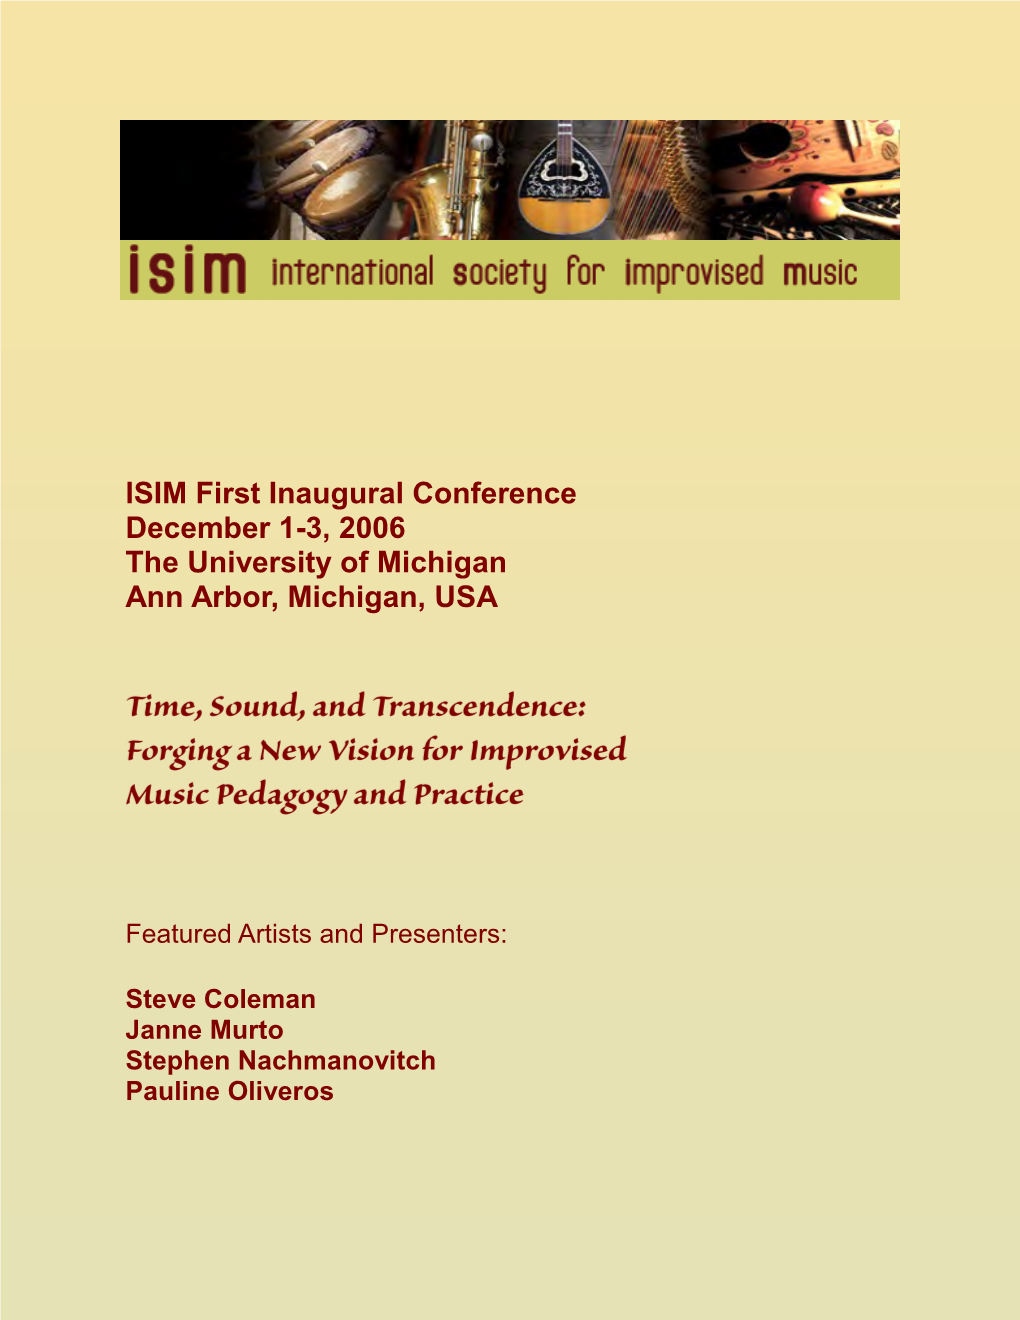 ISIM First Inaugural Conference December 1-3, 2006 the University of Michigan Ann Arbor, Michigan, USA